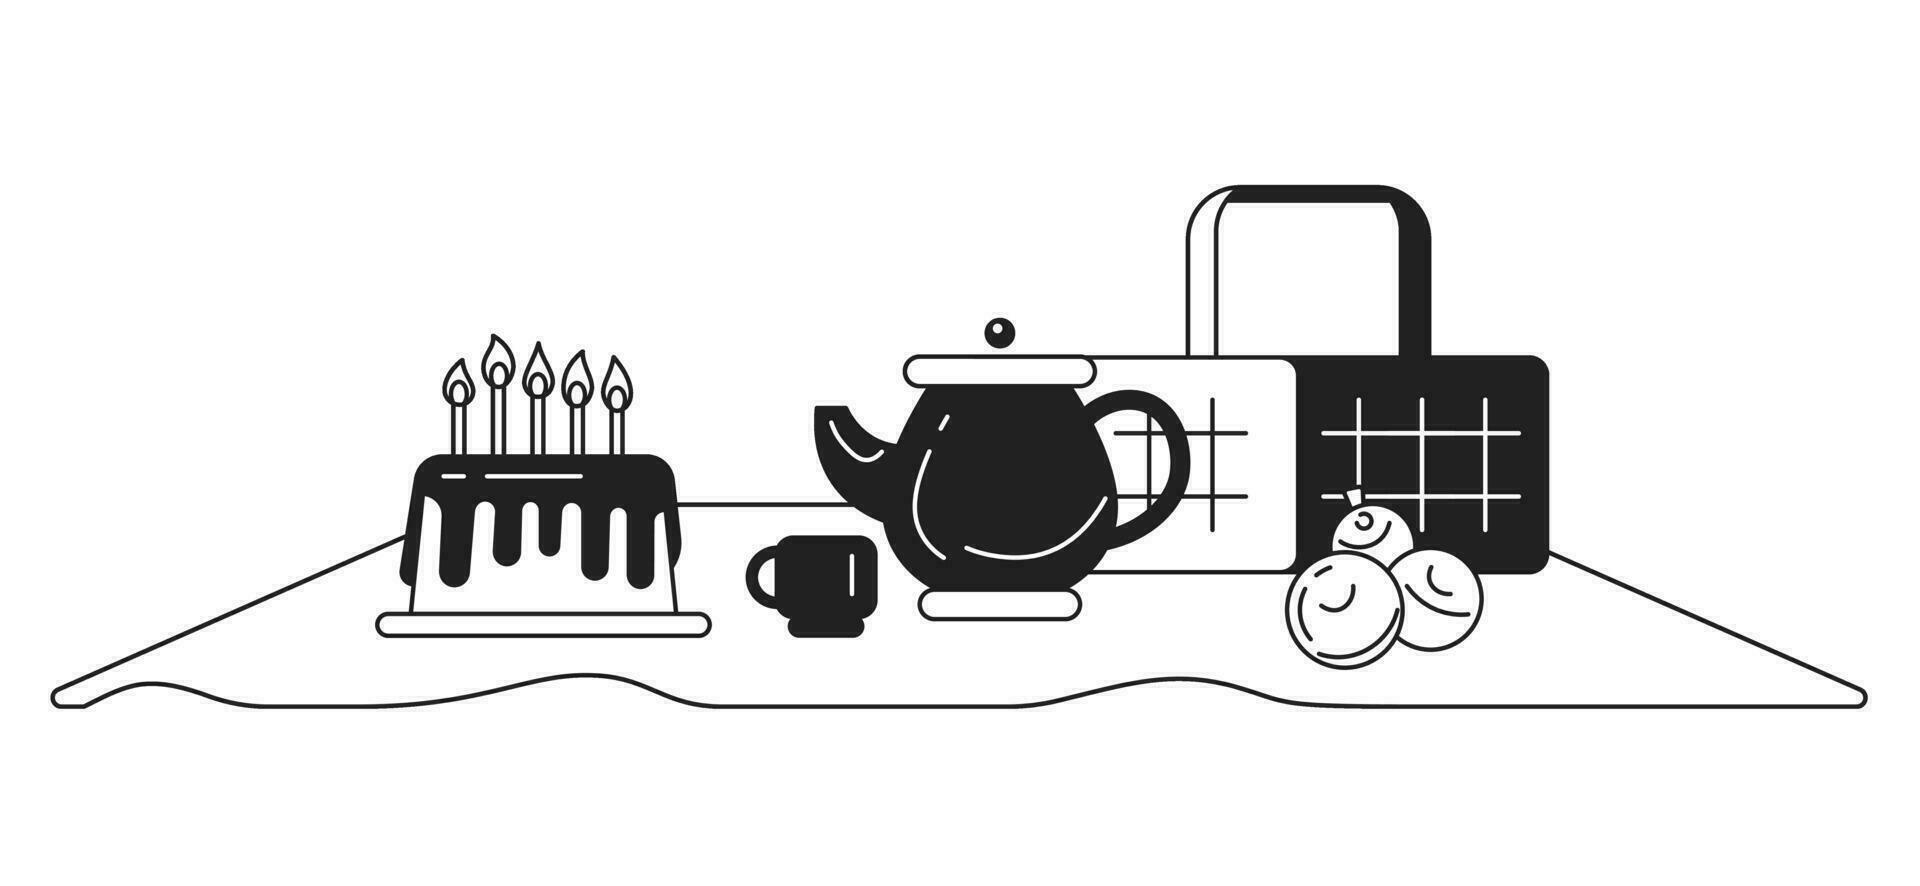 Picnic set monochrome concept vector spot illustration. Birthday cake. Blanket and basket 2D flat bw cartoon objects for web UI design. Isolated editable creative image